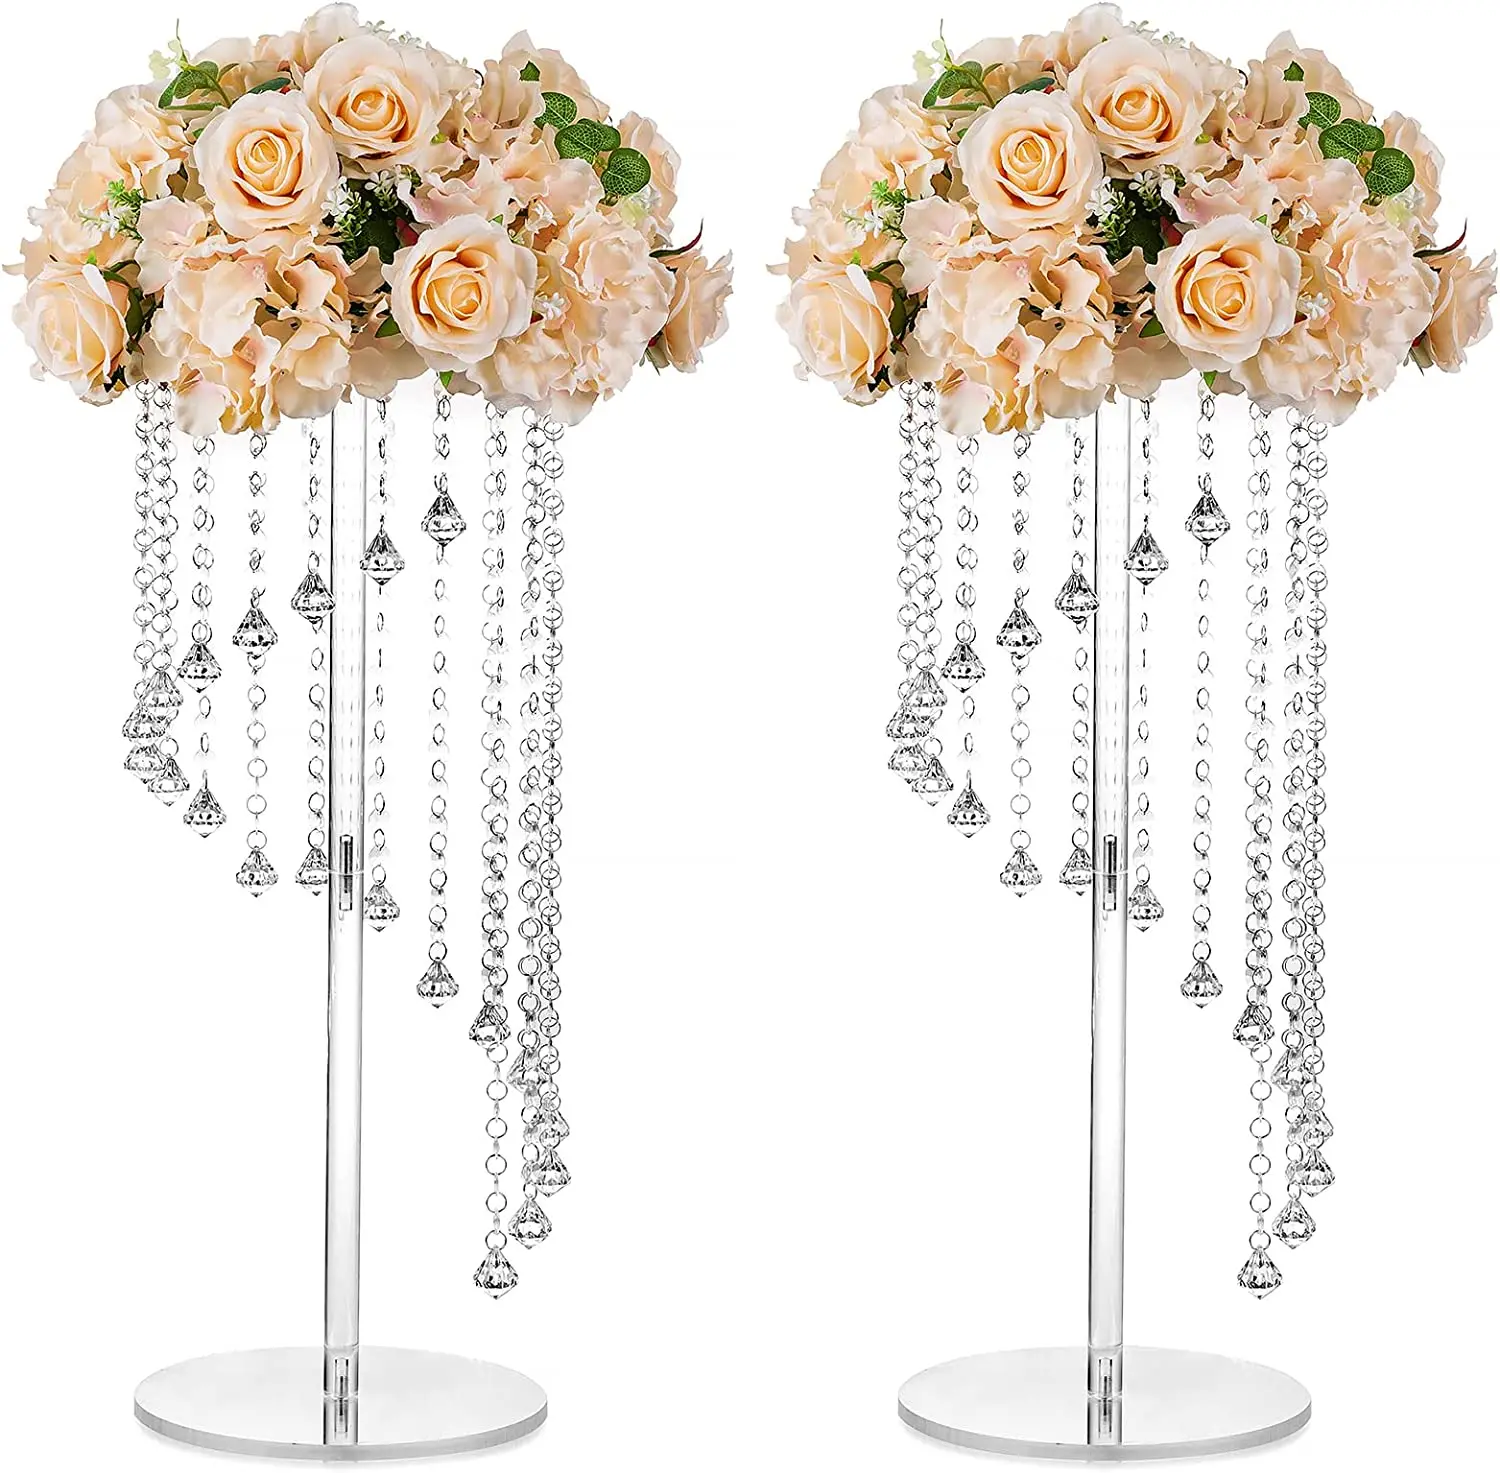 

Acrylic Clear Vase Stand Column Flower Stand Wedding Decorations Acrylic flower stand for Wedding Centerpieces Home Decor